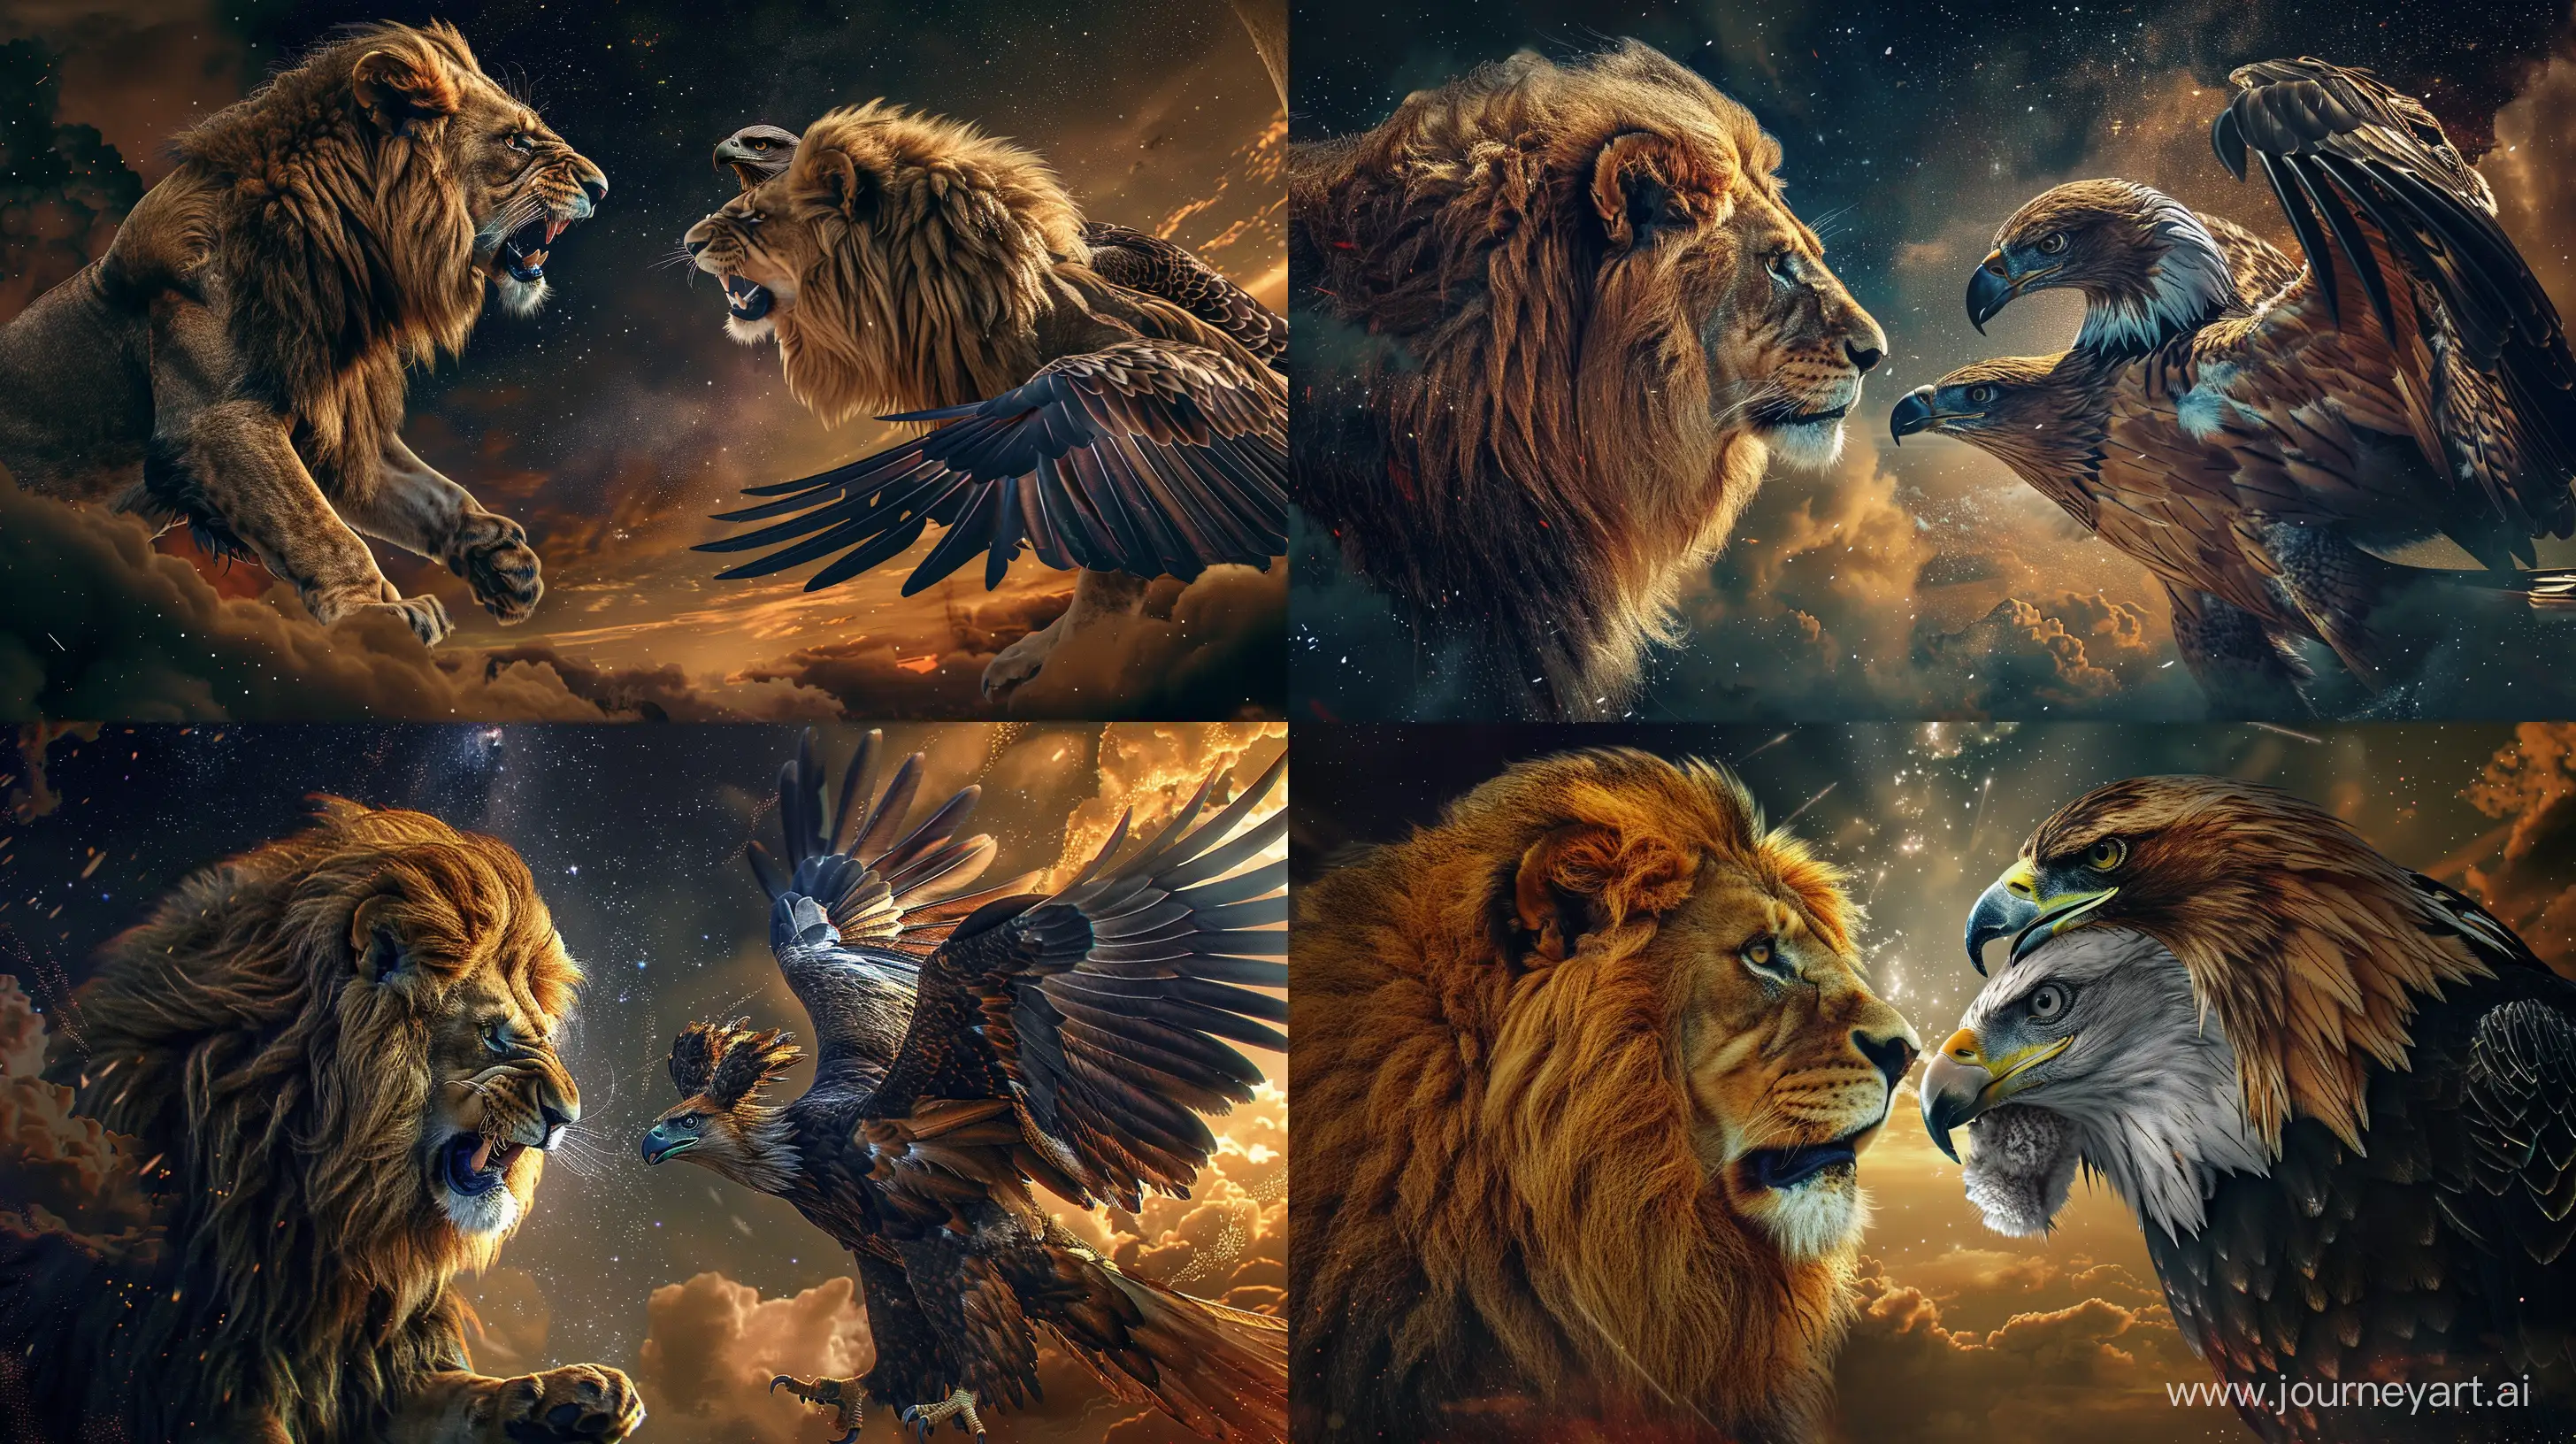 Majestic-Clash-Realistic-Lion-and-DoubleHeaded-Eagle-in-Fierce-Encounter